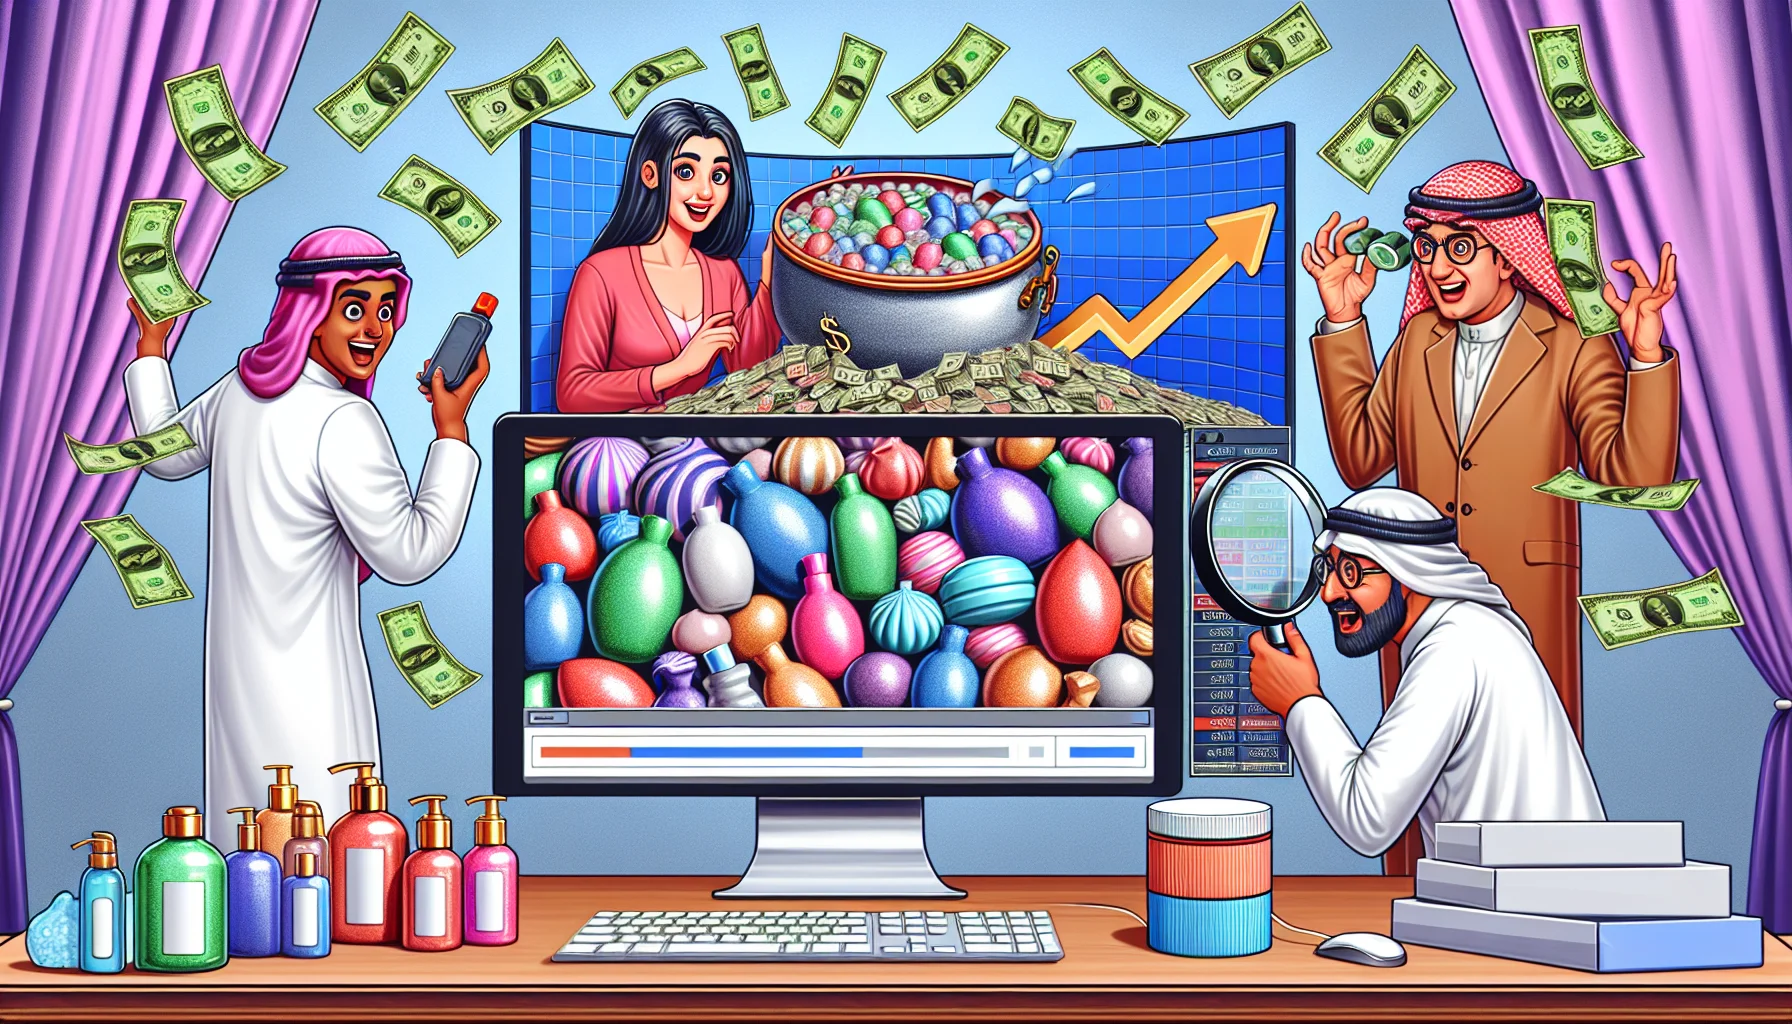 Depict a humorous and realistic scenario involving an online financial venture. Center the image around a multitude of colorfully packaged virtual soaps, lotions, and bath bombs arrayed on a computer screen, portraying the theme of an affiliate program. Add elements like an excited South Asian woman examining an upturning line graph on another monitor, dollar bills taking flight from the screen, and an Arabian man with a magnifying glass studying the computer codes, symbolizing a lucrative partnership with an online bath and body product company.